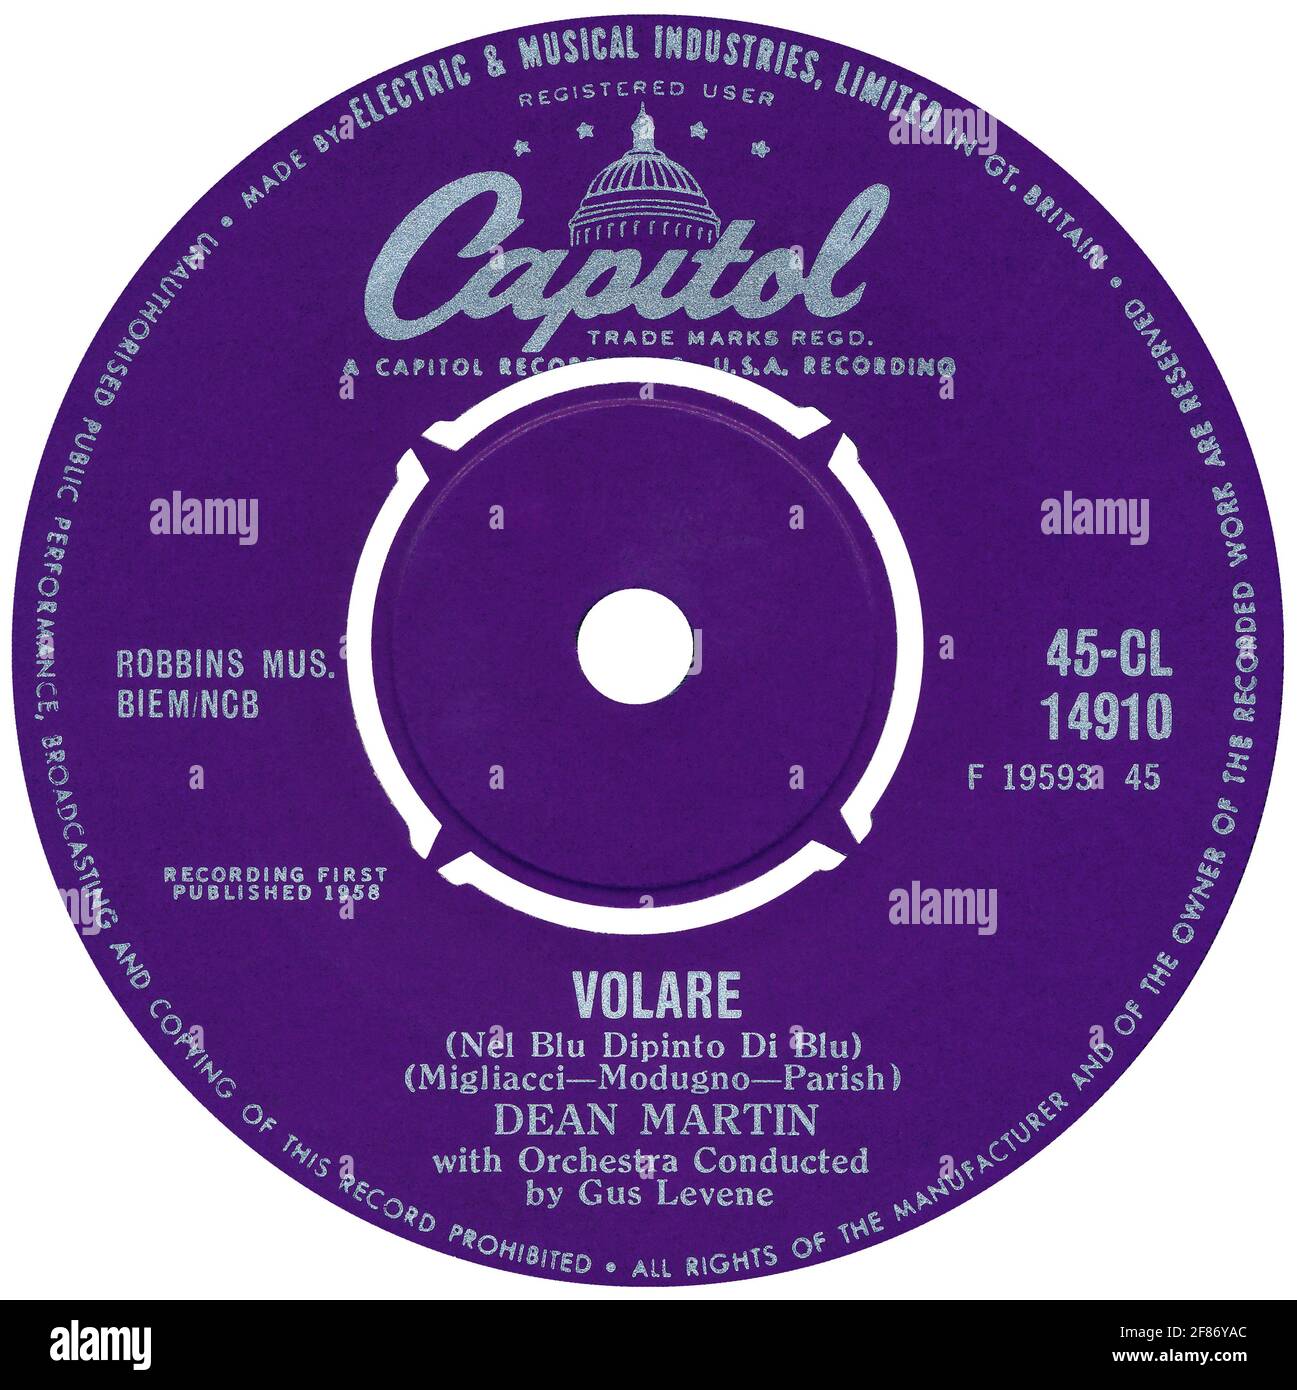 45 RPM 7' UK record label of Volare (Nel Blu Dipinto Di Blu) by Dean Martin. Written by Domenico Modugno and Franco Migliacci with English lyrics by Mitchell Parish. Orchestra conducted by Gus Levene. Released on the Capitol label in August 1958. Stock Photo